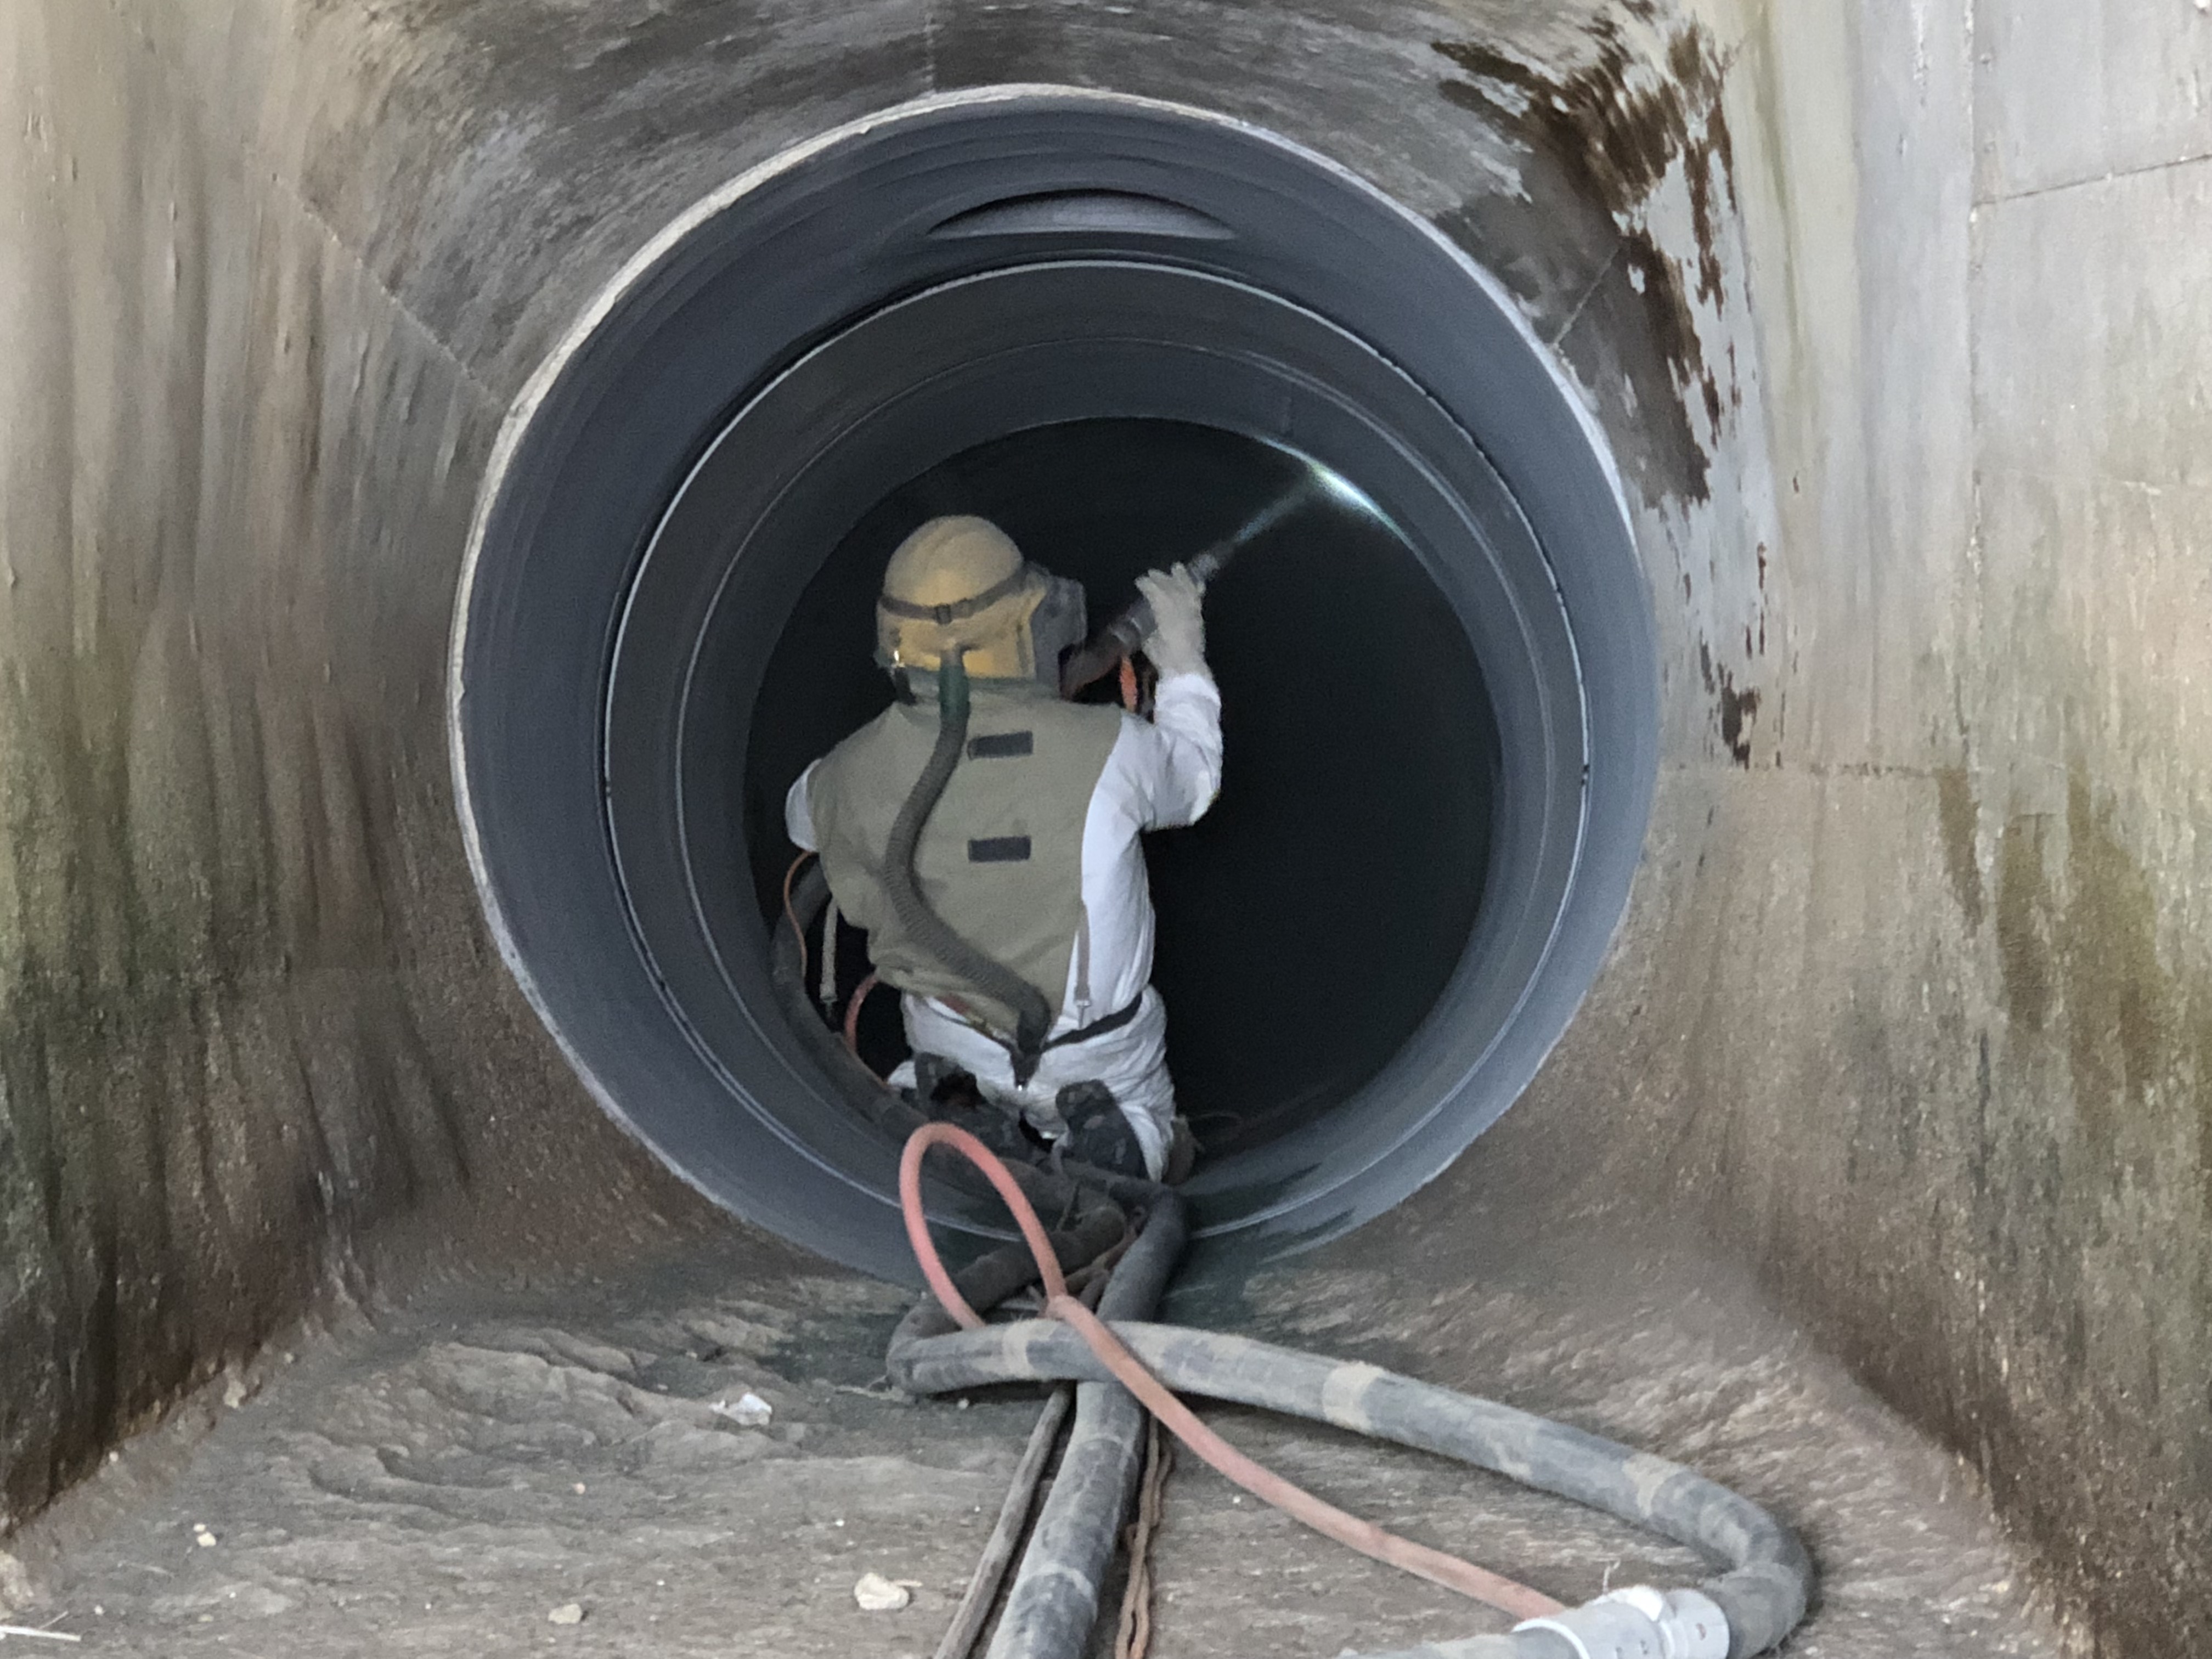 Workers from Cabloco Services removed the pipe's old coating and applied a new lining to protect the pipe from corrosion.